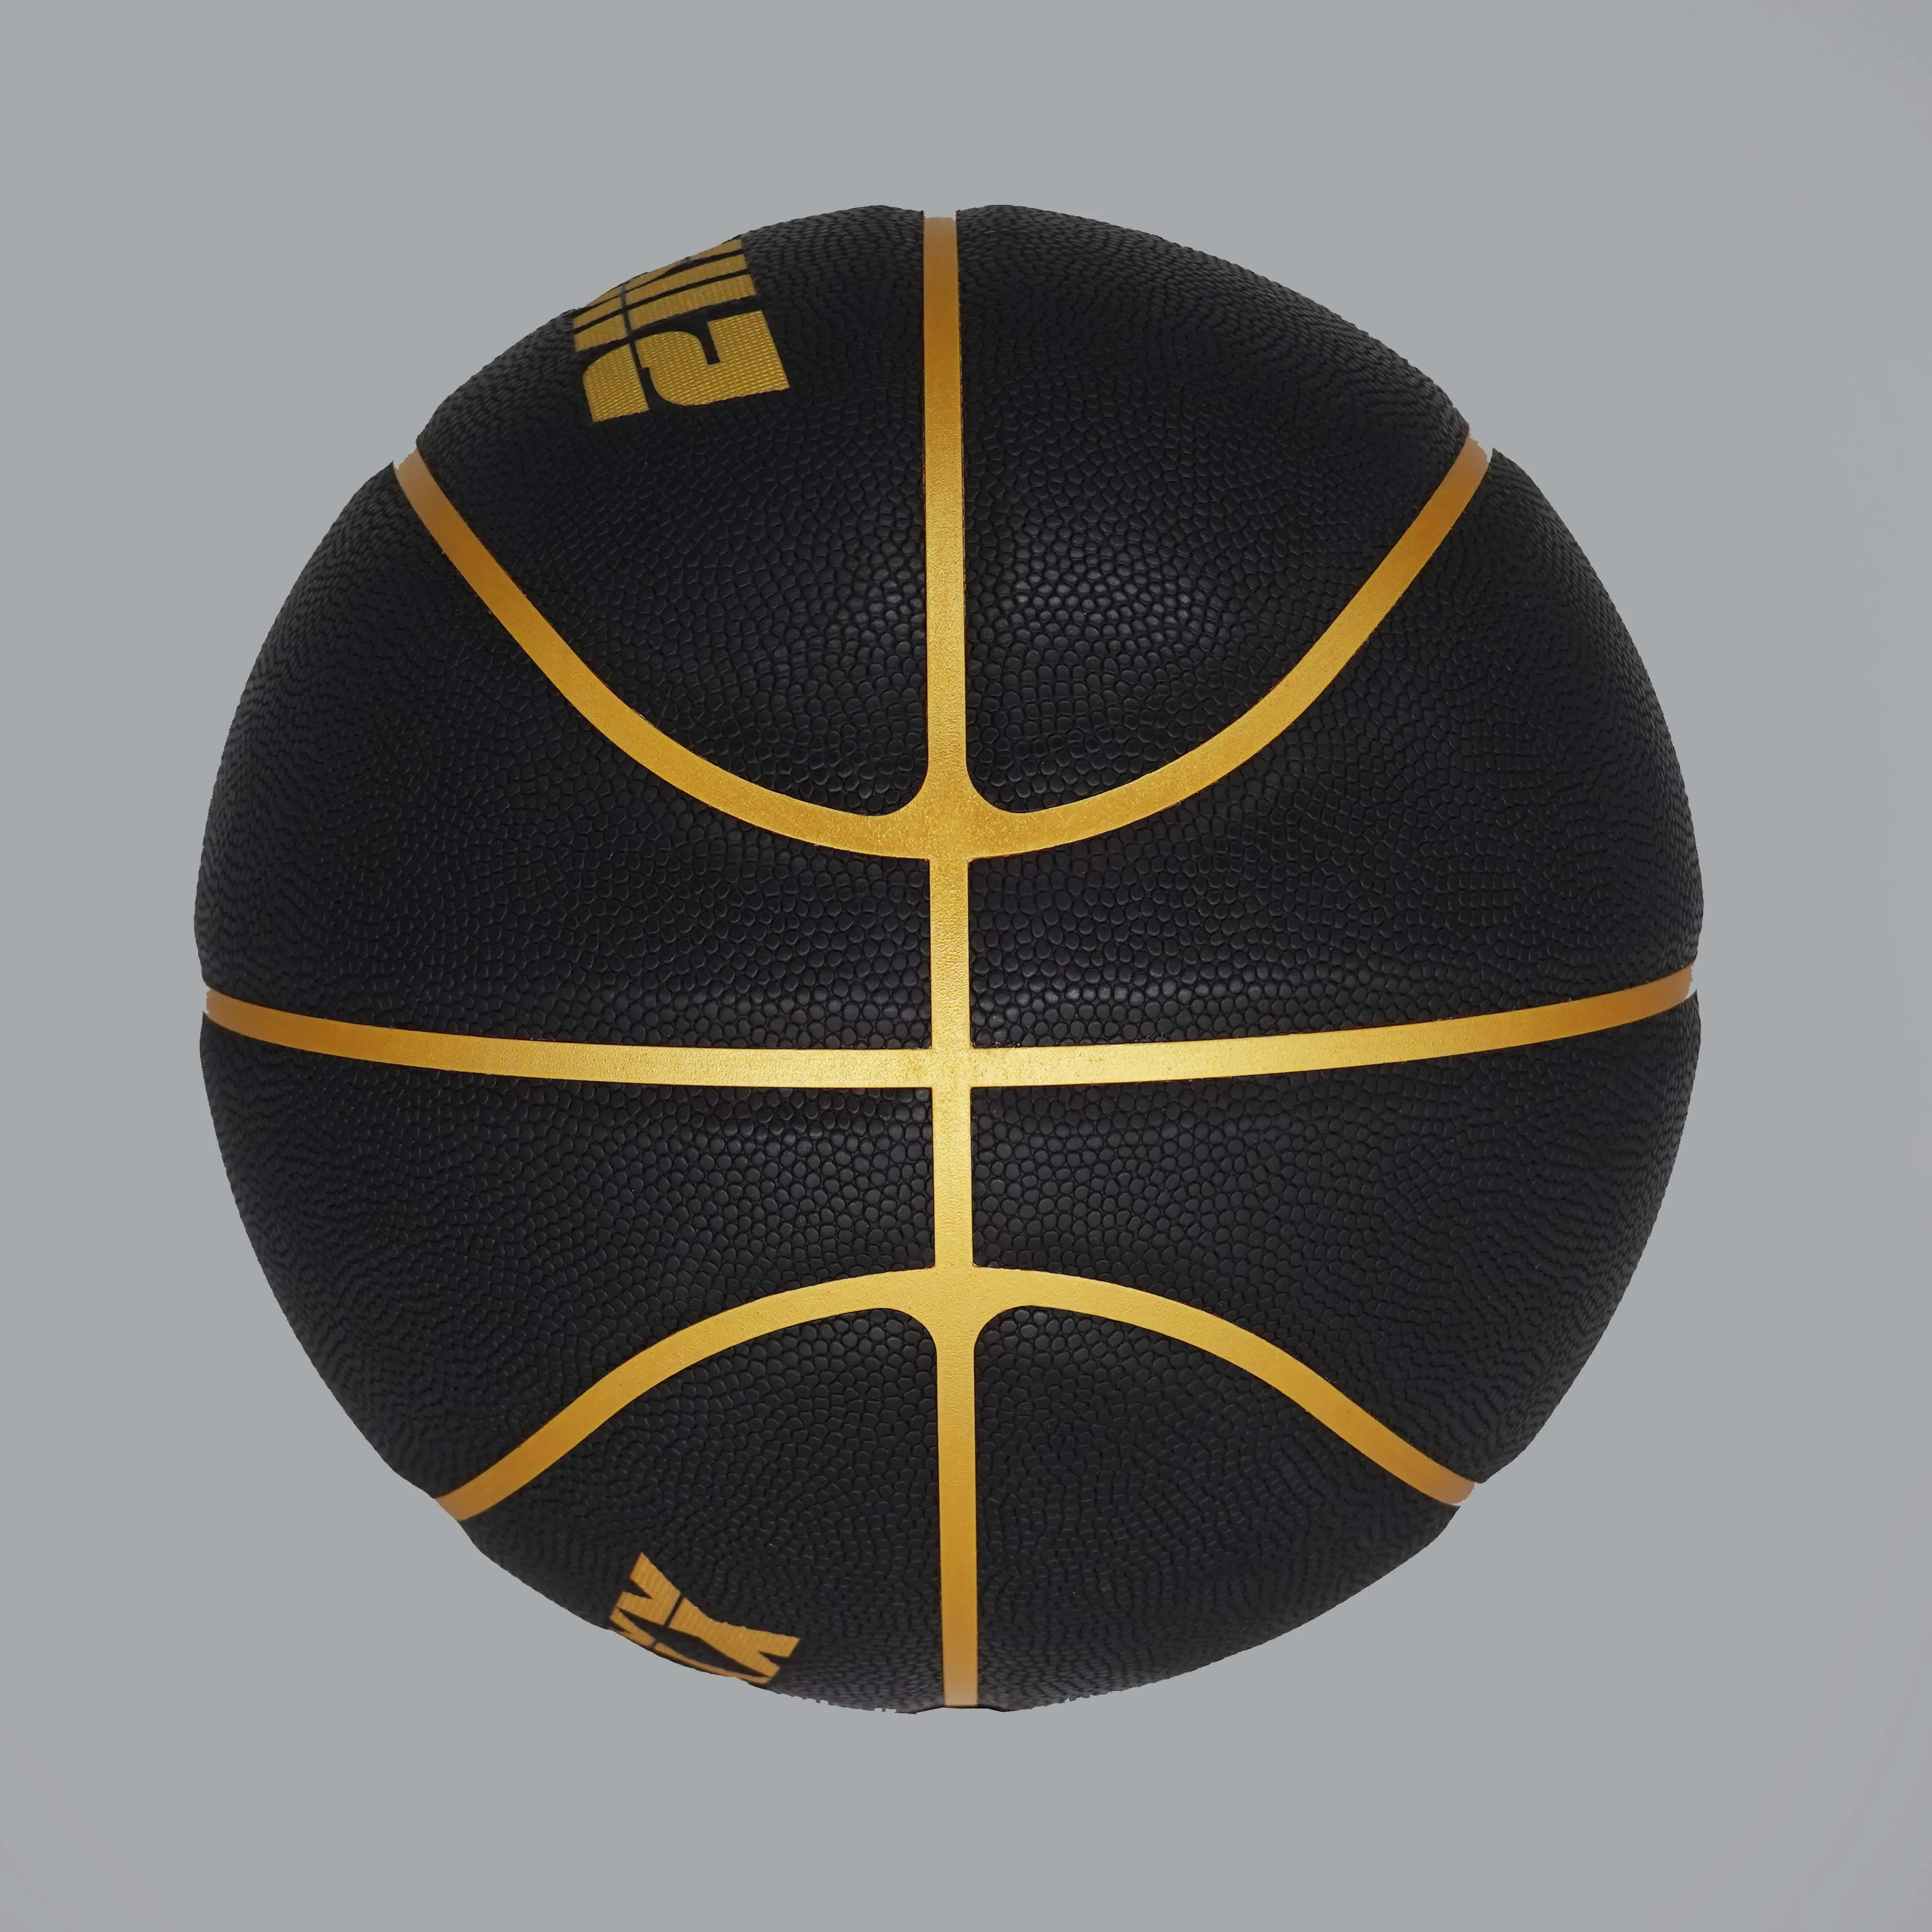 High Quality Basketball Ball Official Size Weight Customized Logo PU Leather Basketball Heavy Duty Rubber Nylon Basketballs